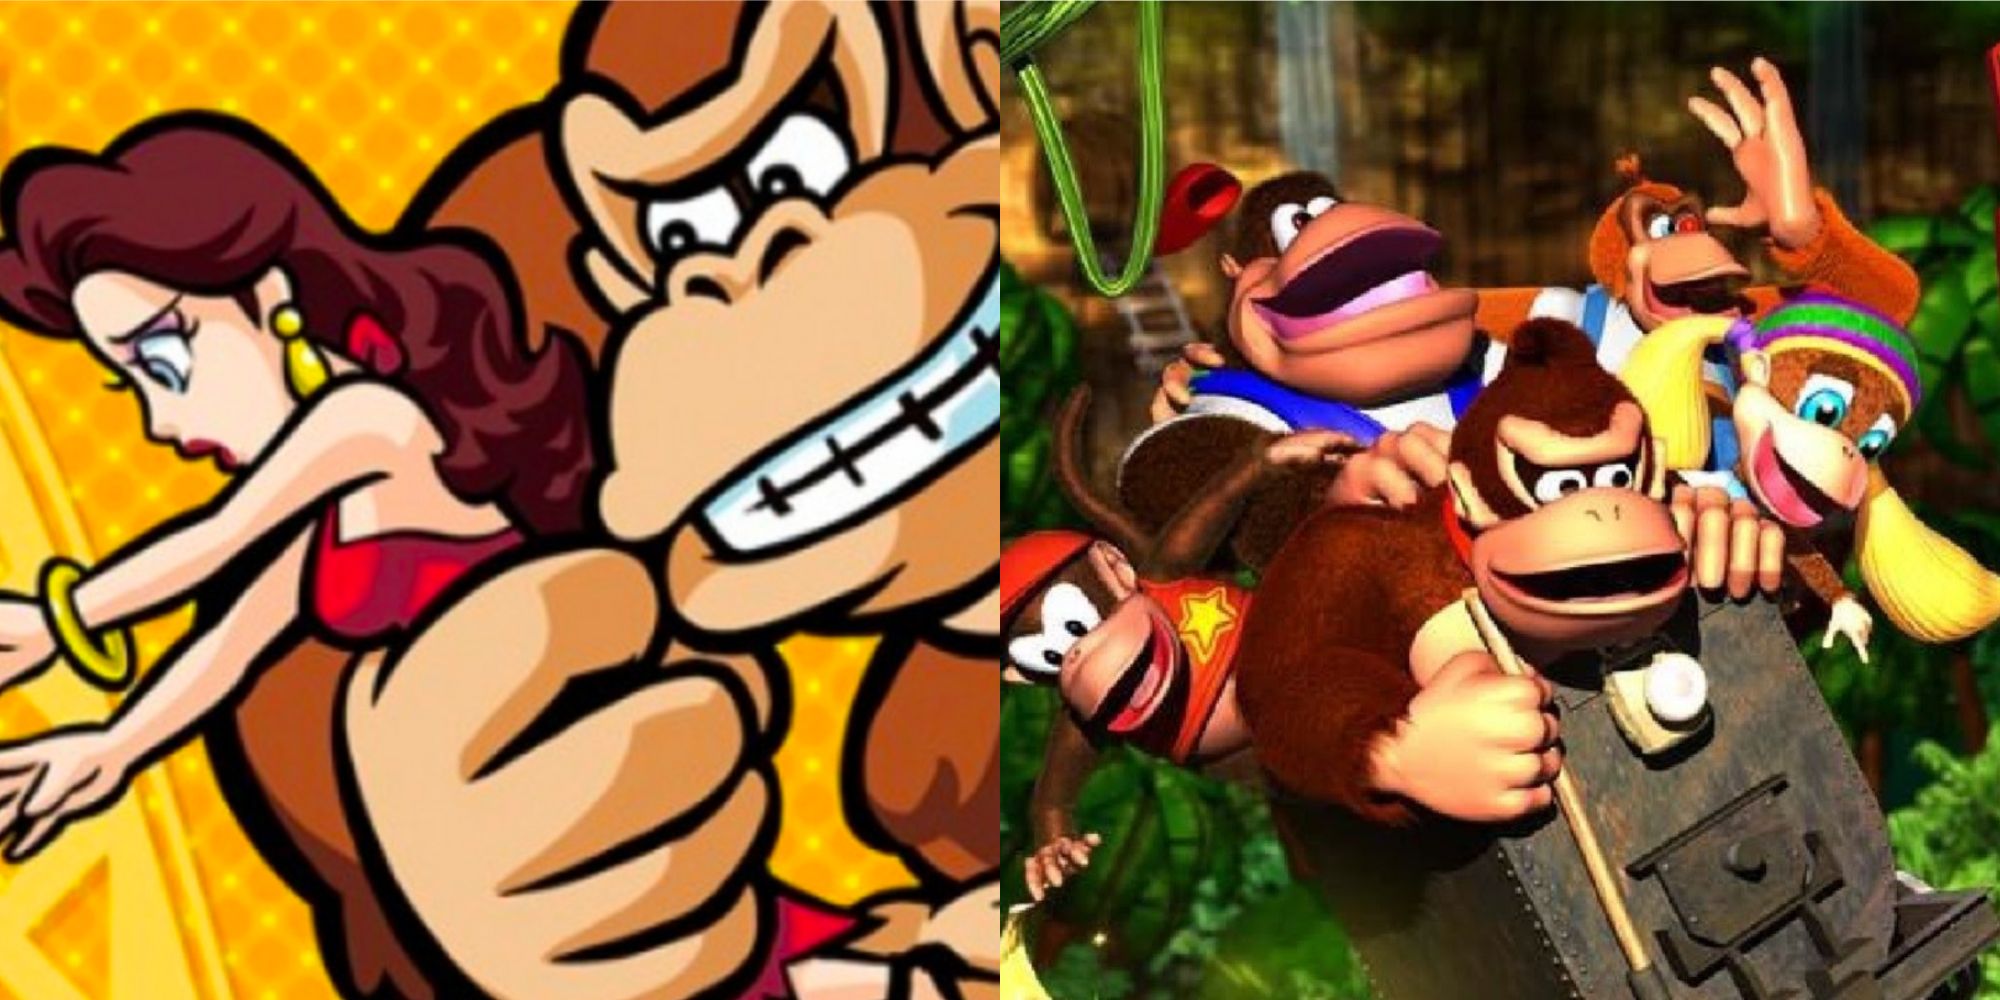 Split image of Donkey Kong holding Pauline and the DK family